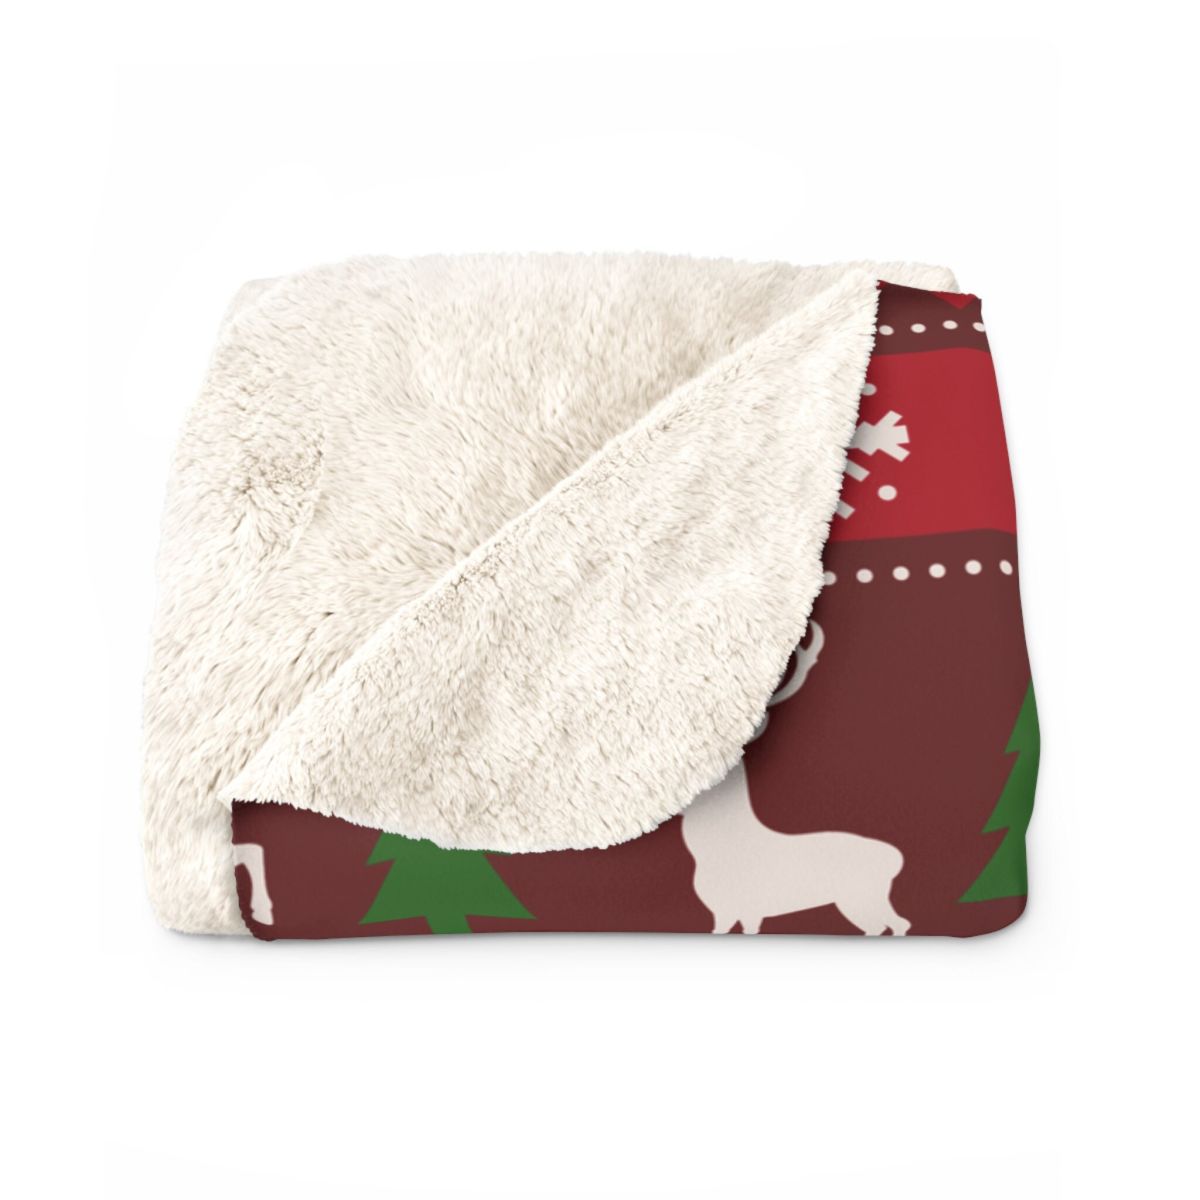 Bedsure Christmas Throw Blanket - Soft and Warm Sherpa Christmas Elk Throw Blankets for Couch, Sofa, Bed, Winter Blanket for Christmas,